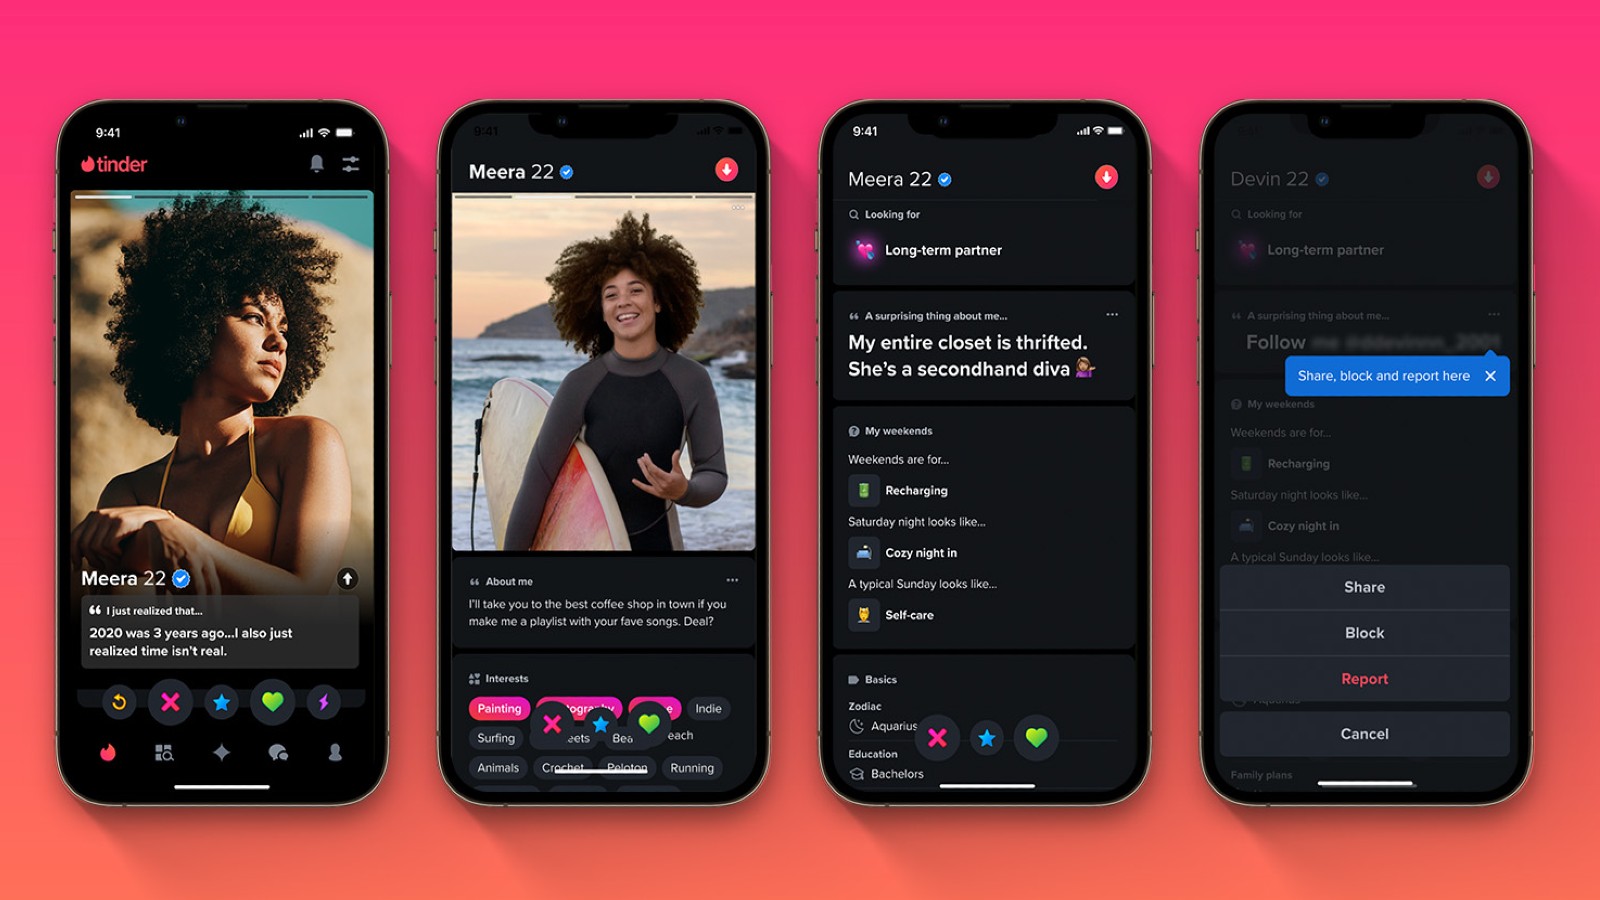 Tinder introduces new features and refreshed UI tailored for modern